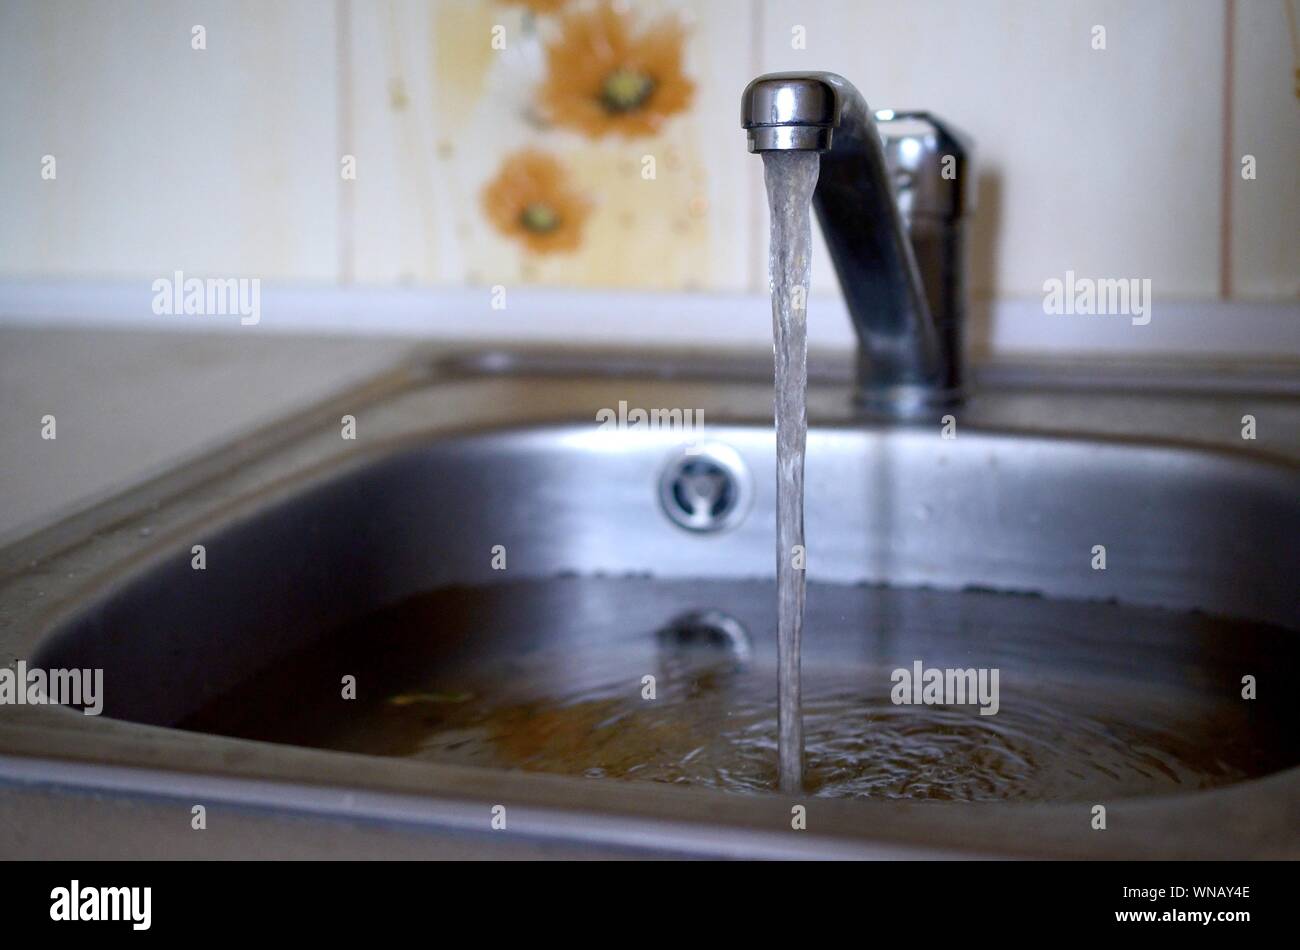 Stainless steel sink plug hole close up full of water and particles of food. Overflowing kitchen sink, clogged drain. Problems with the water supply Stock Photo